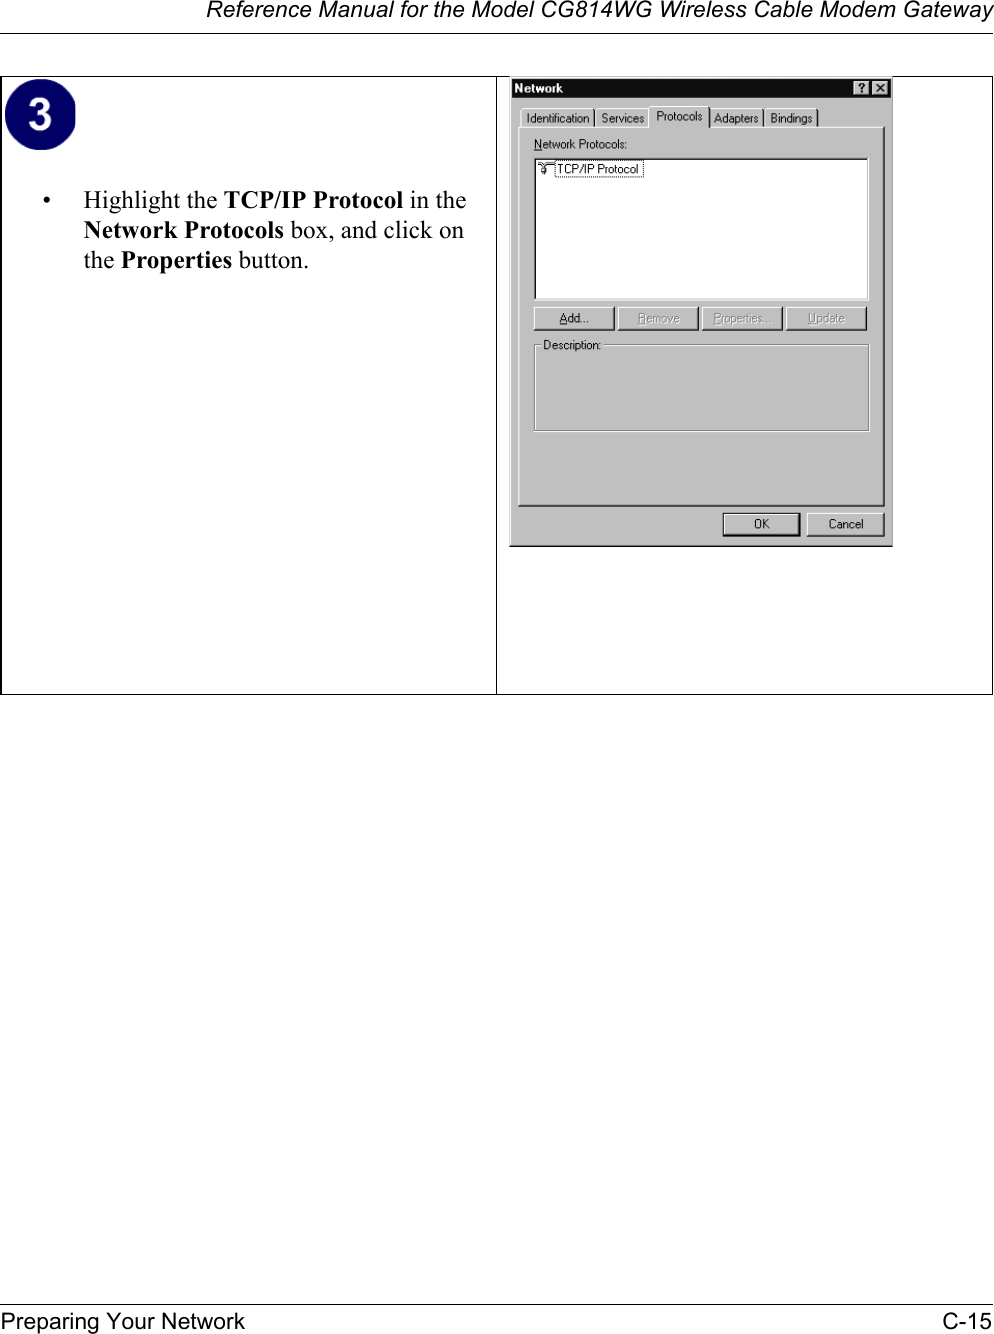 Reference Manual for the Model CG814WG Wireless Cable Modem GatewayPreparing Your Network C-15• Highlight the TCP/IP Protocol in the Network Protocols box, and click on the Properties button.